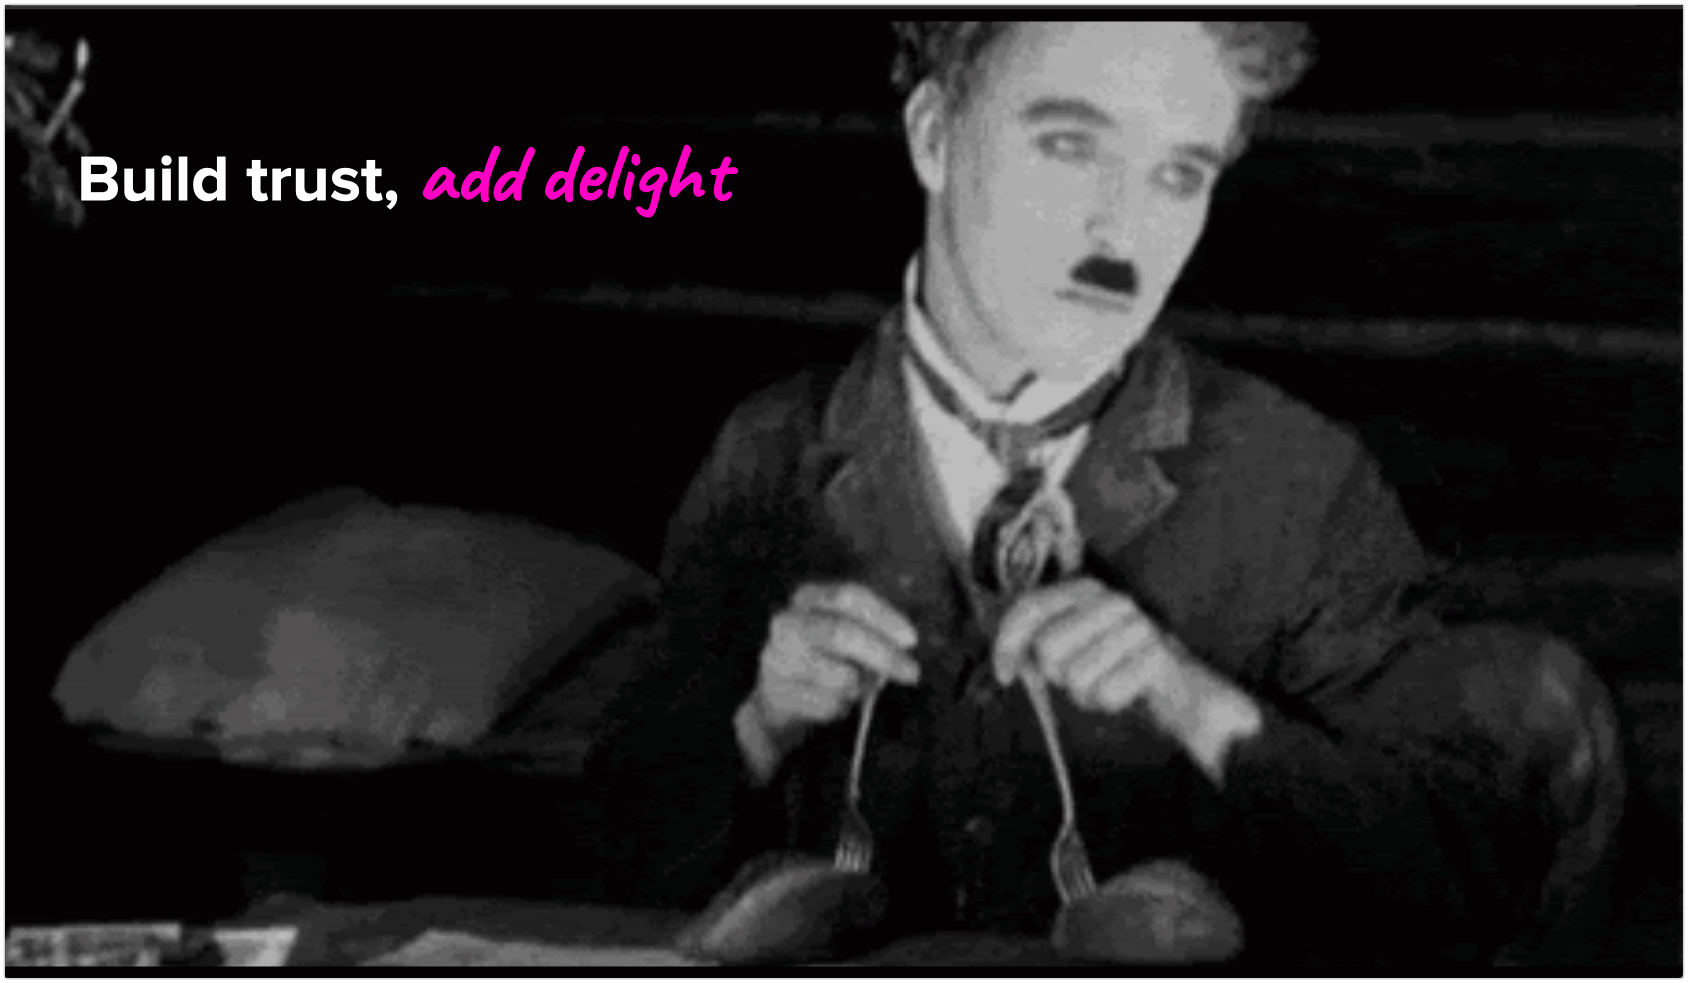 Charlie Chaplin dancing too bread rolls with forks as legs on a table with the words Build trust, add delight written in neon pink handwriting